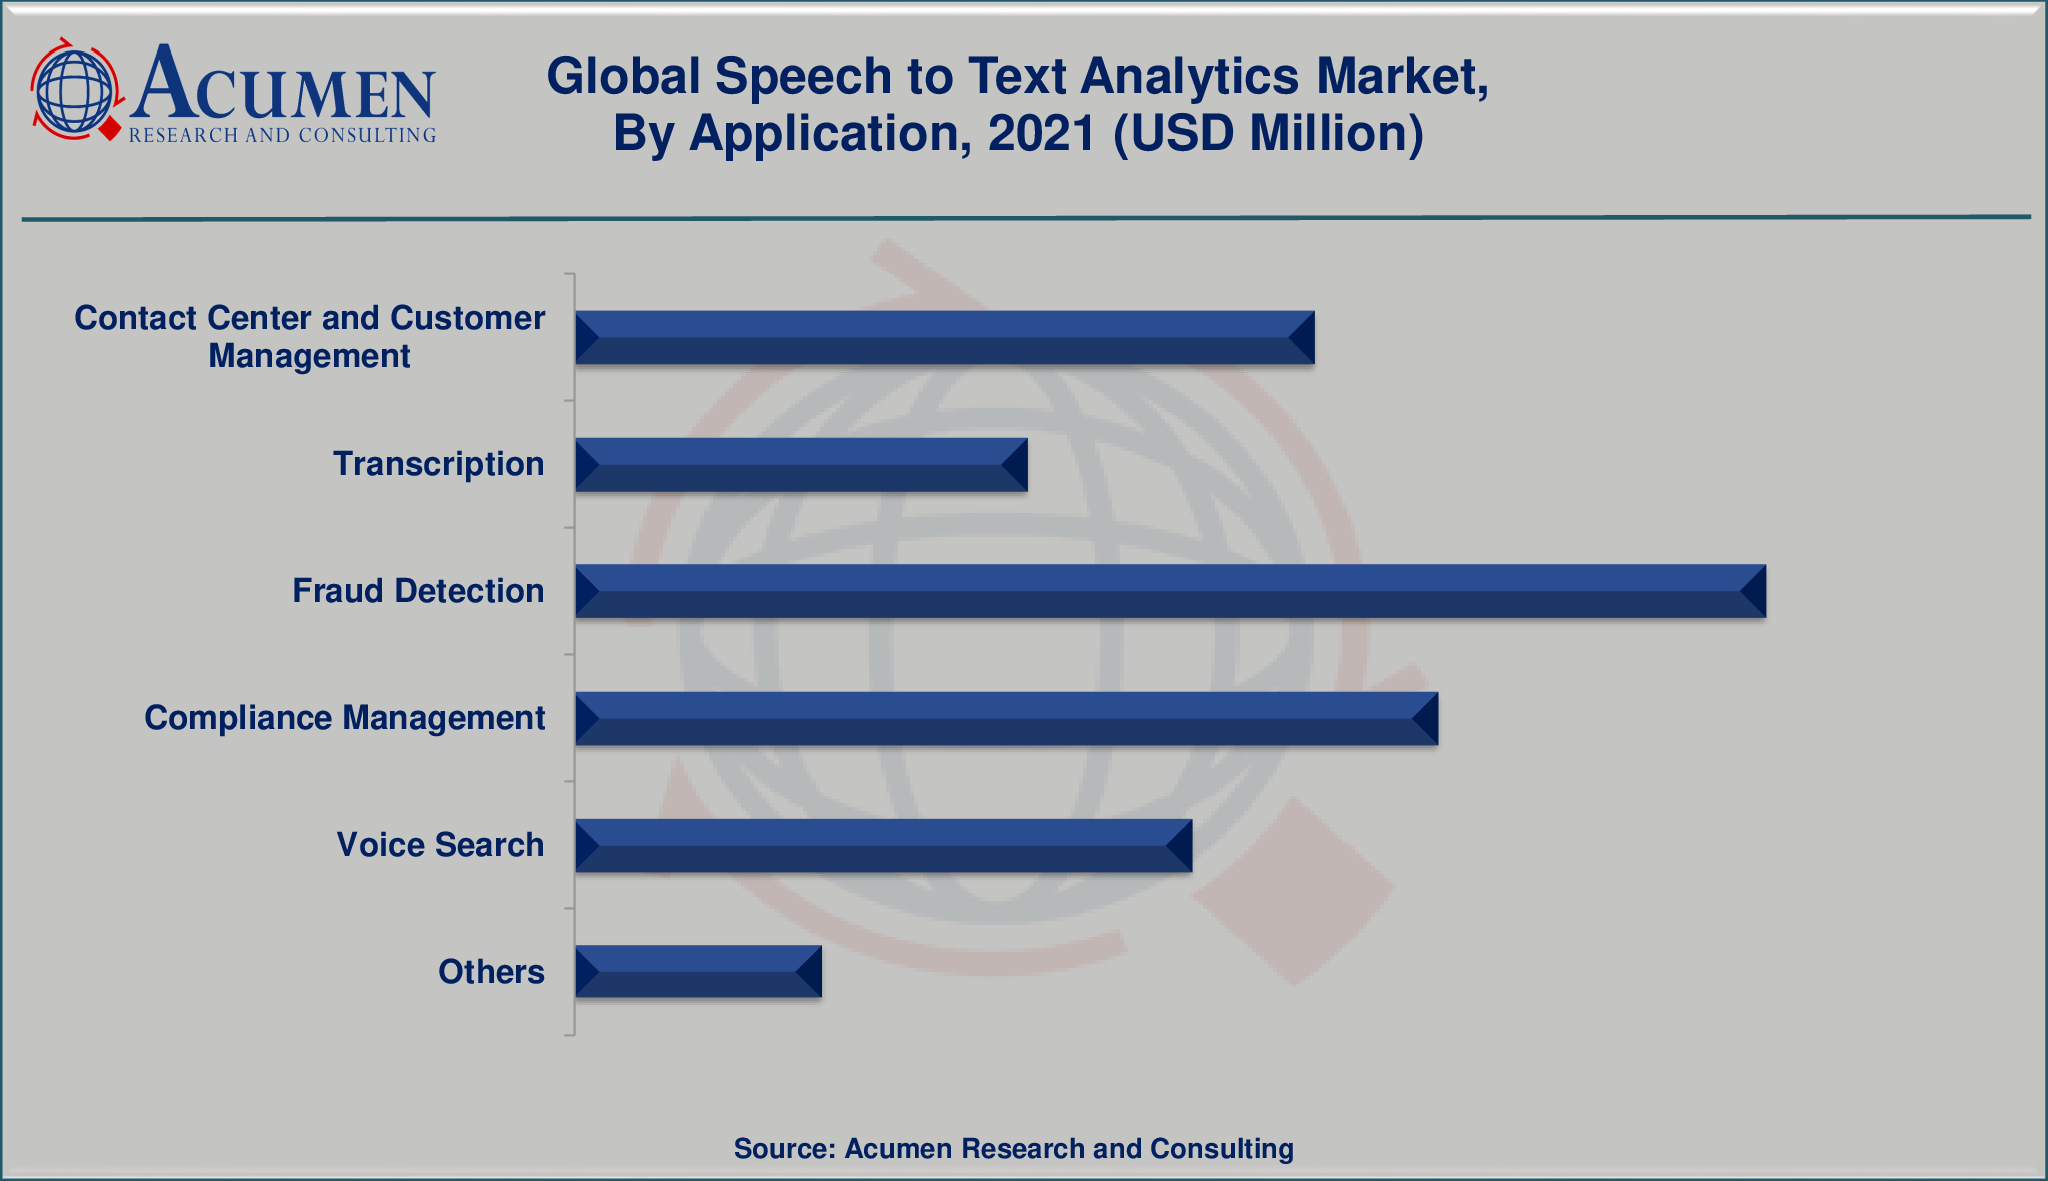 Speech to Text Analytics Market By Application will achieve a market size of USD 8,677 Million by 2030, budding at a CAGR of 17.1%